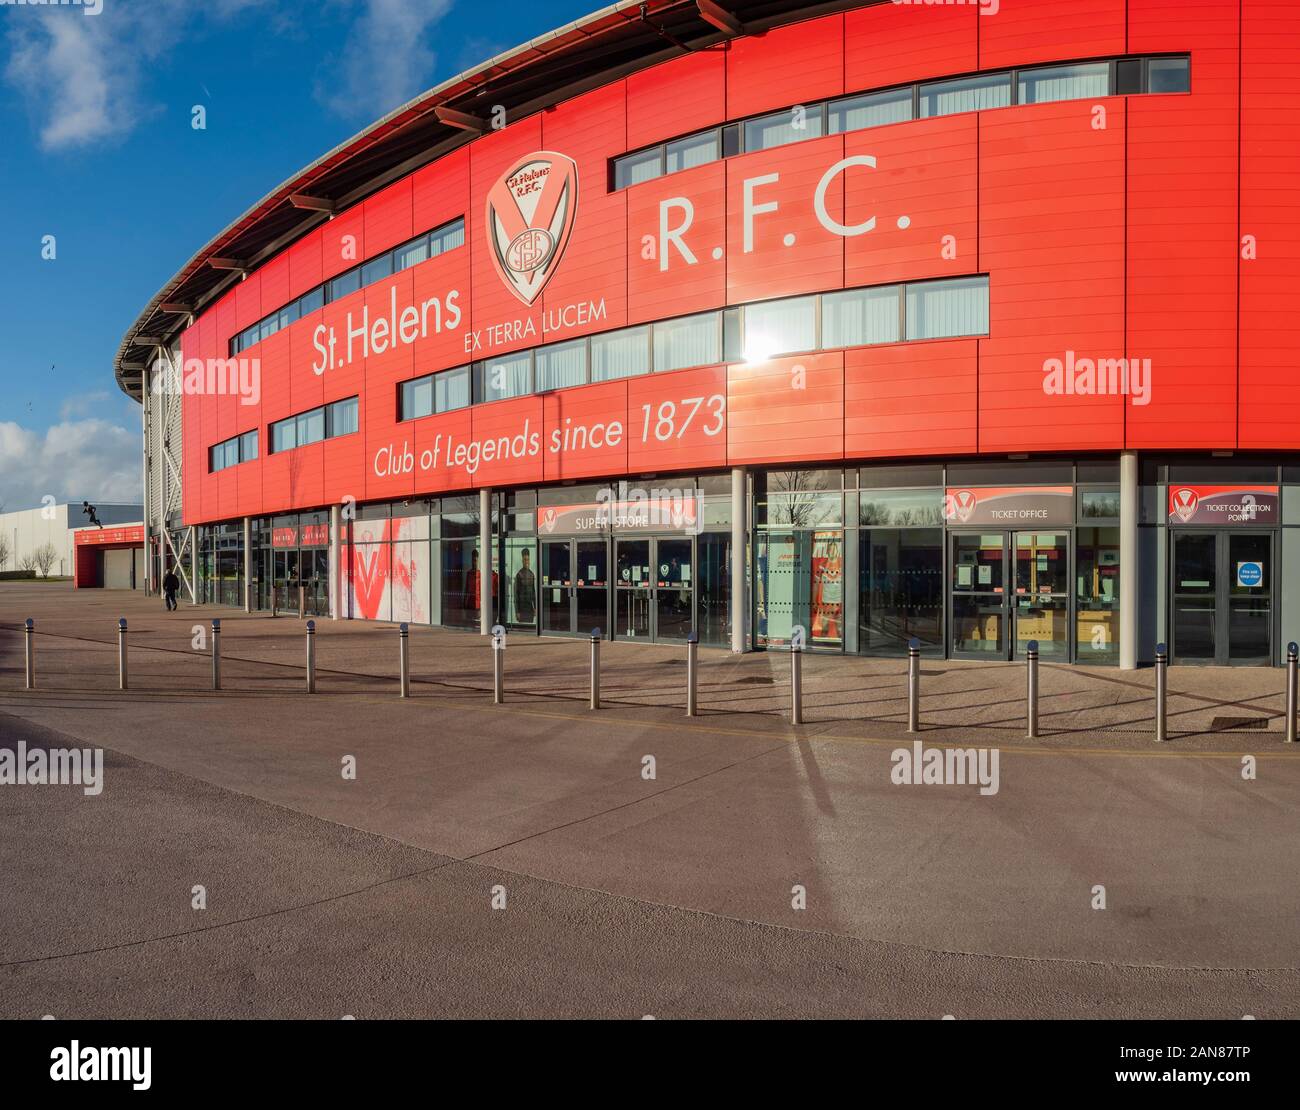 St Helens R.F.C. is a professional rugby league club in St Helens, Merseyside who compete in the Super League, the top tier of competition for rugby Stock Photo